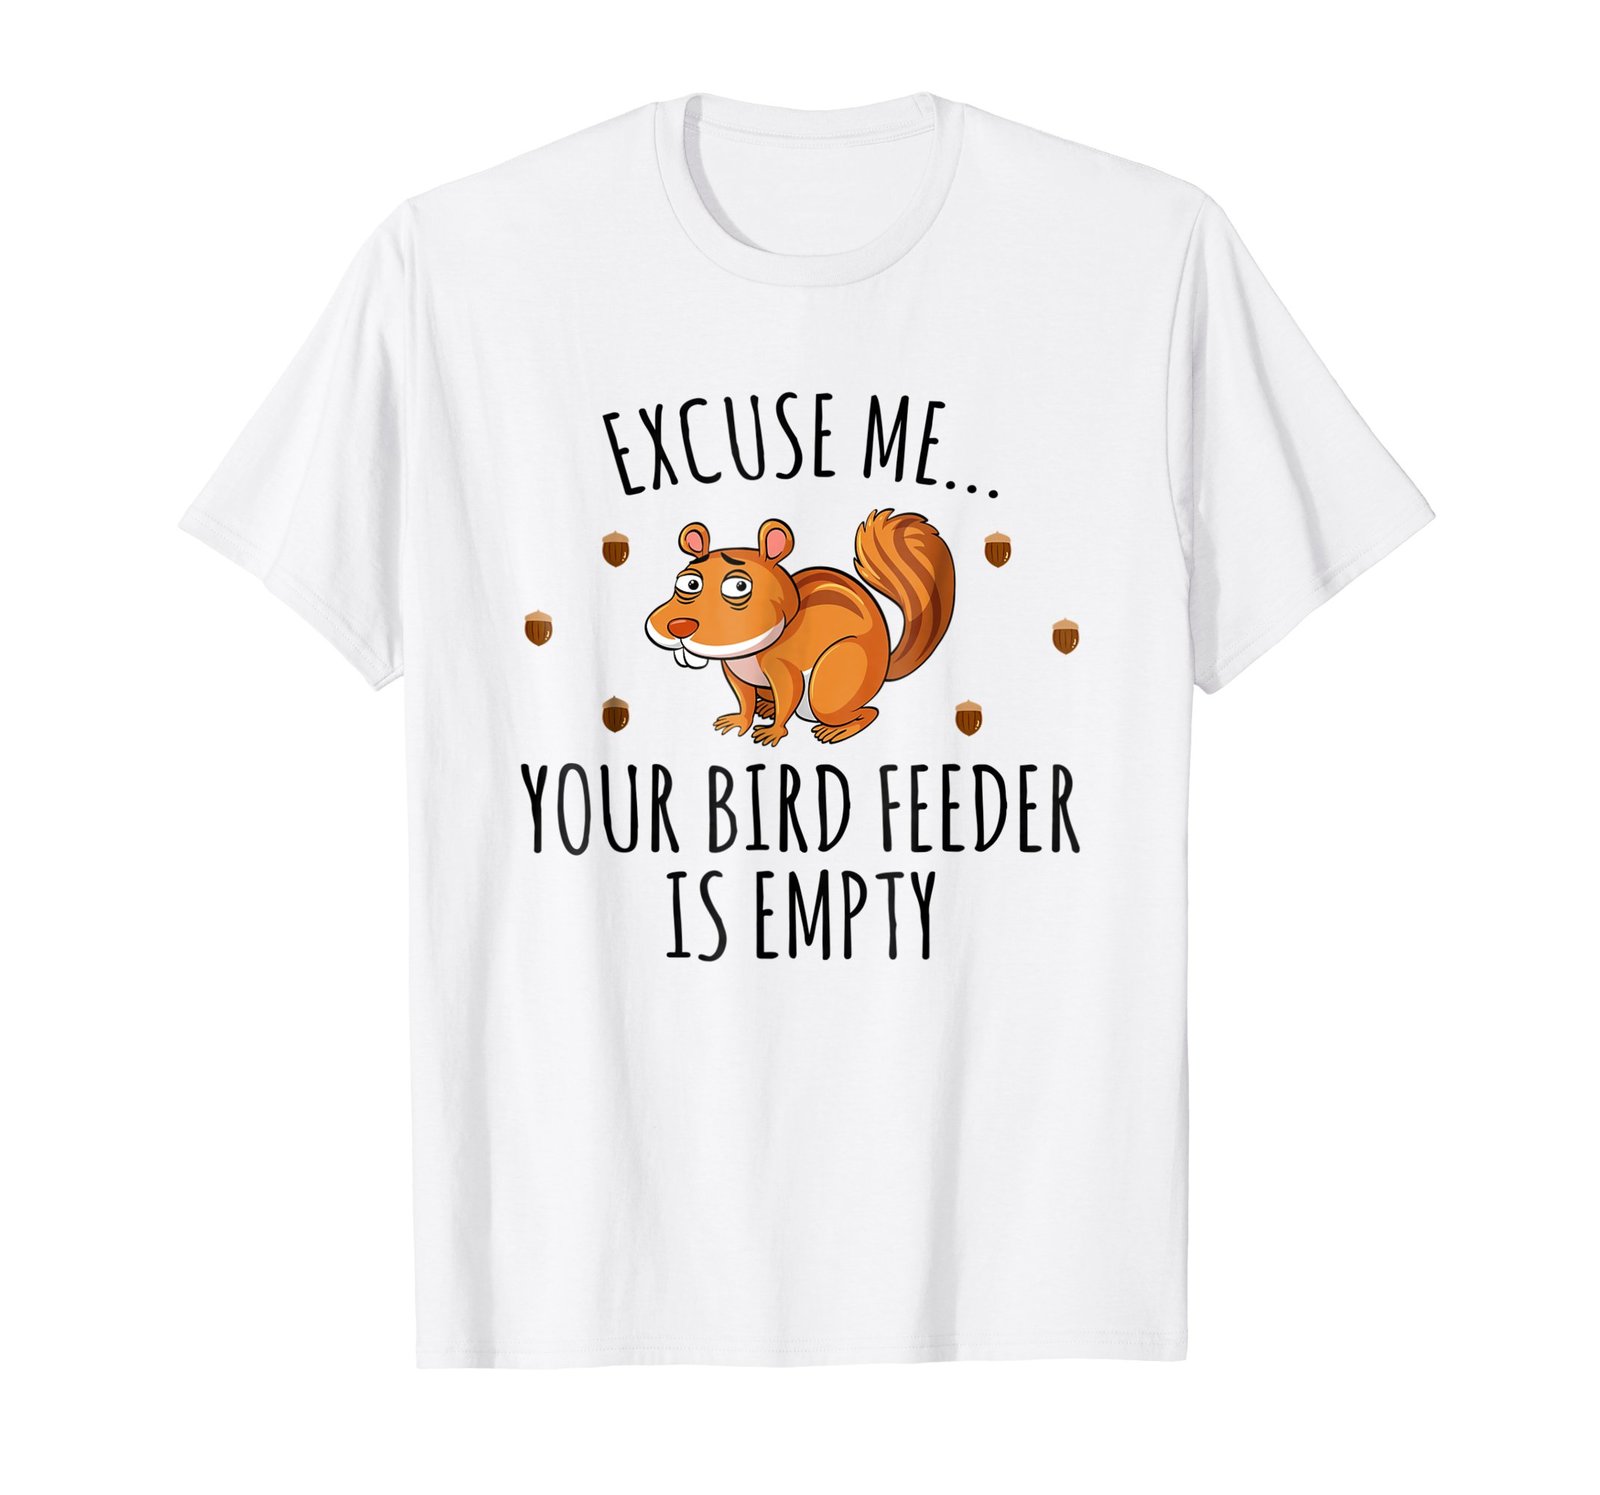 Funny Shirts - Excuse Me Your Bird Feeder Is Empty - Squirrel T-shirt ...